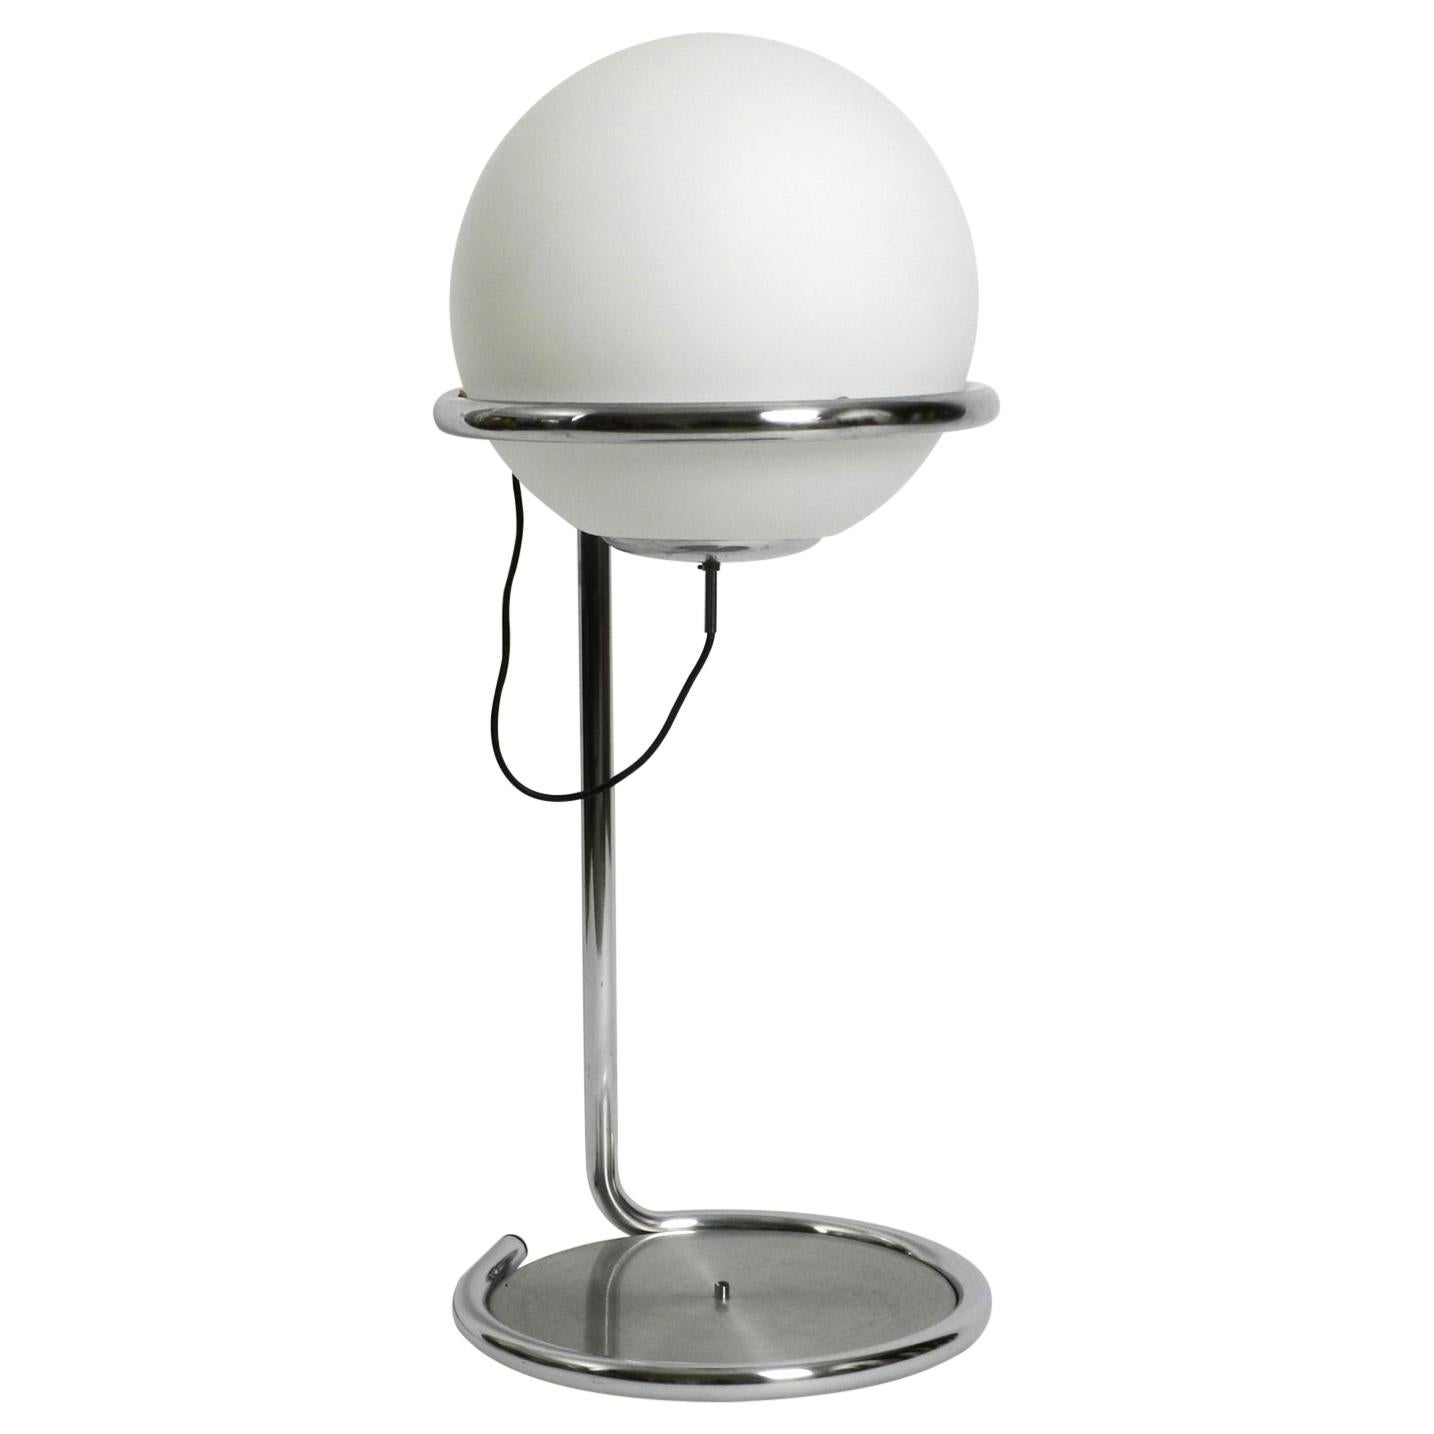 Large Heavy Space Age 1960s Tubular Steel Floor Lamp with Spherical Glass Shade For Sale